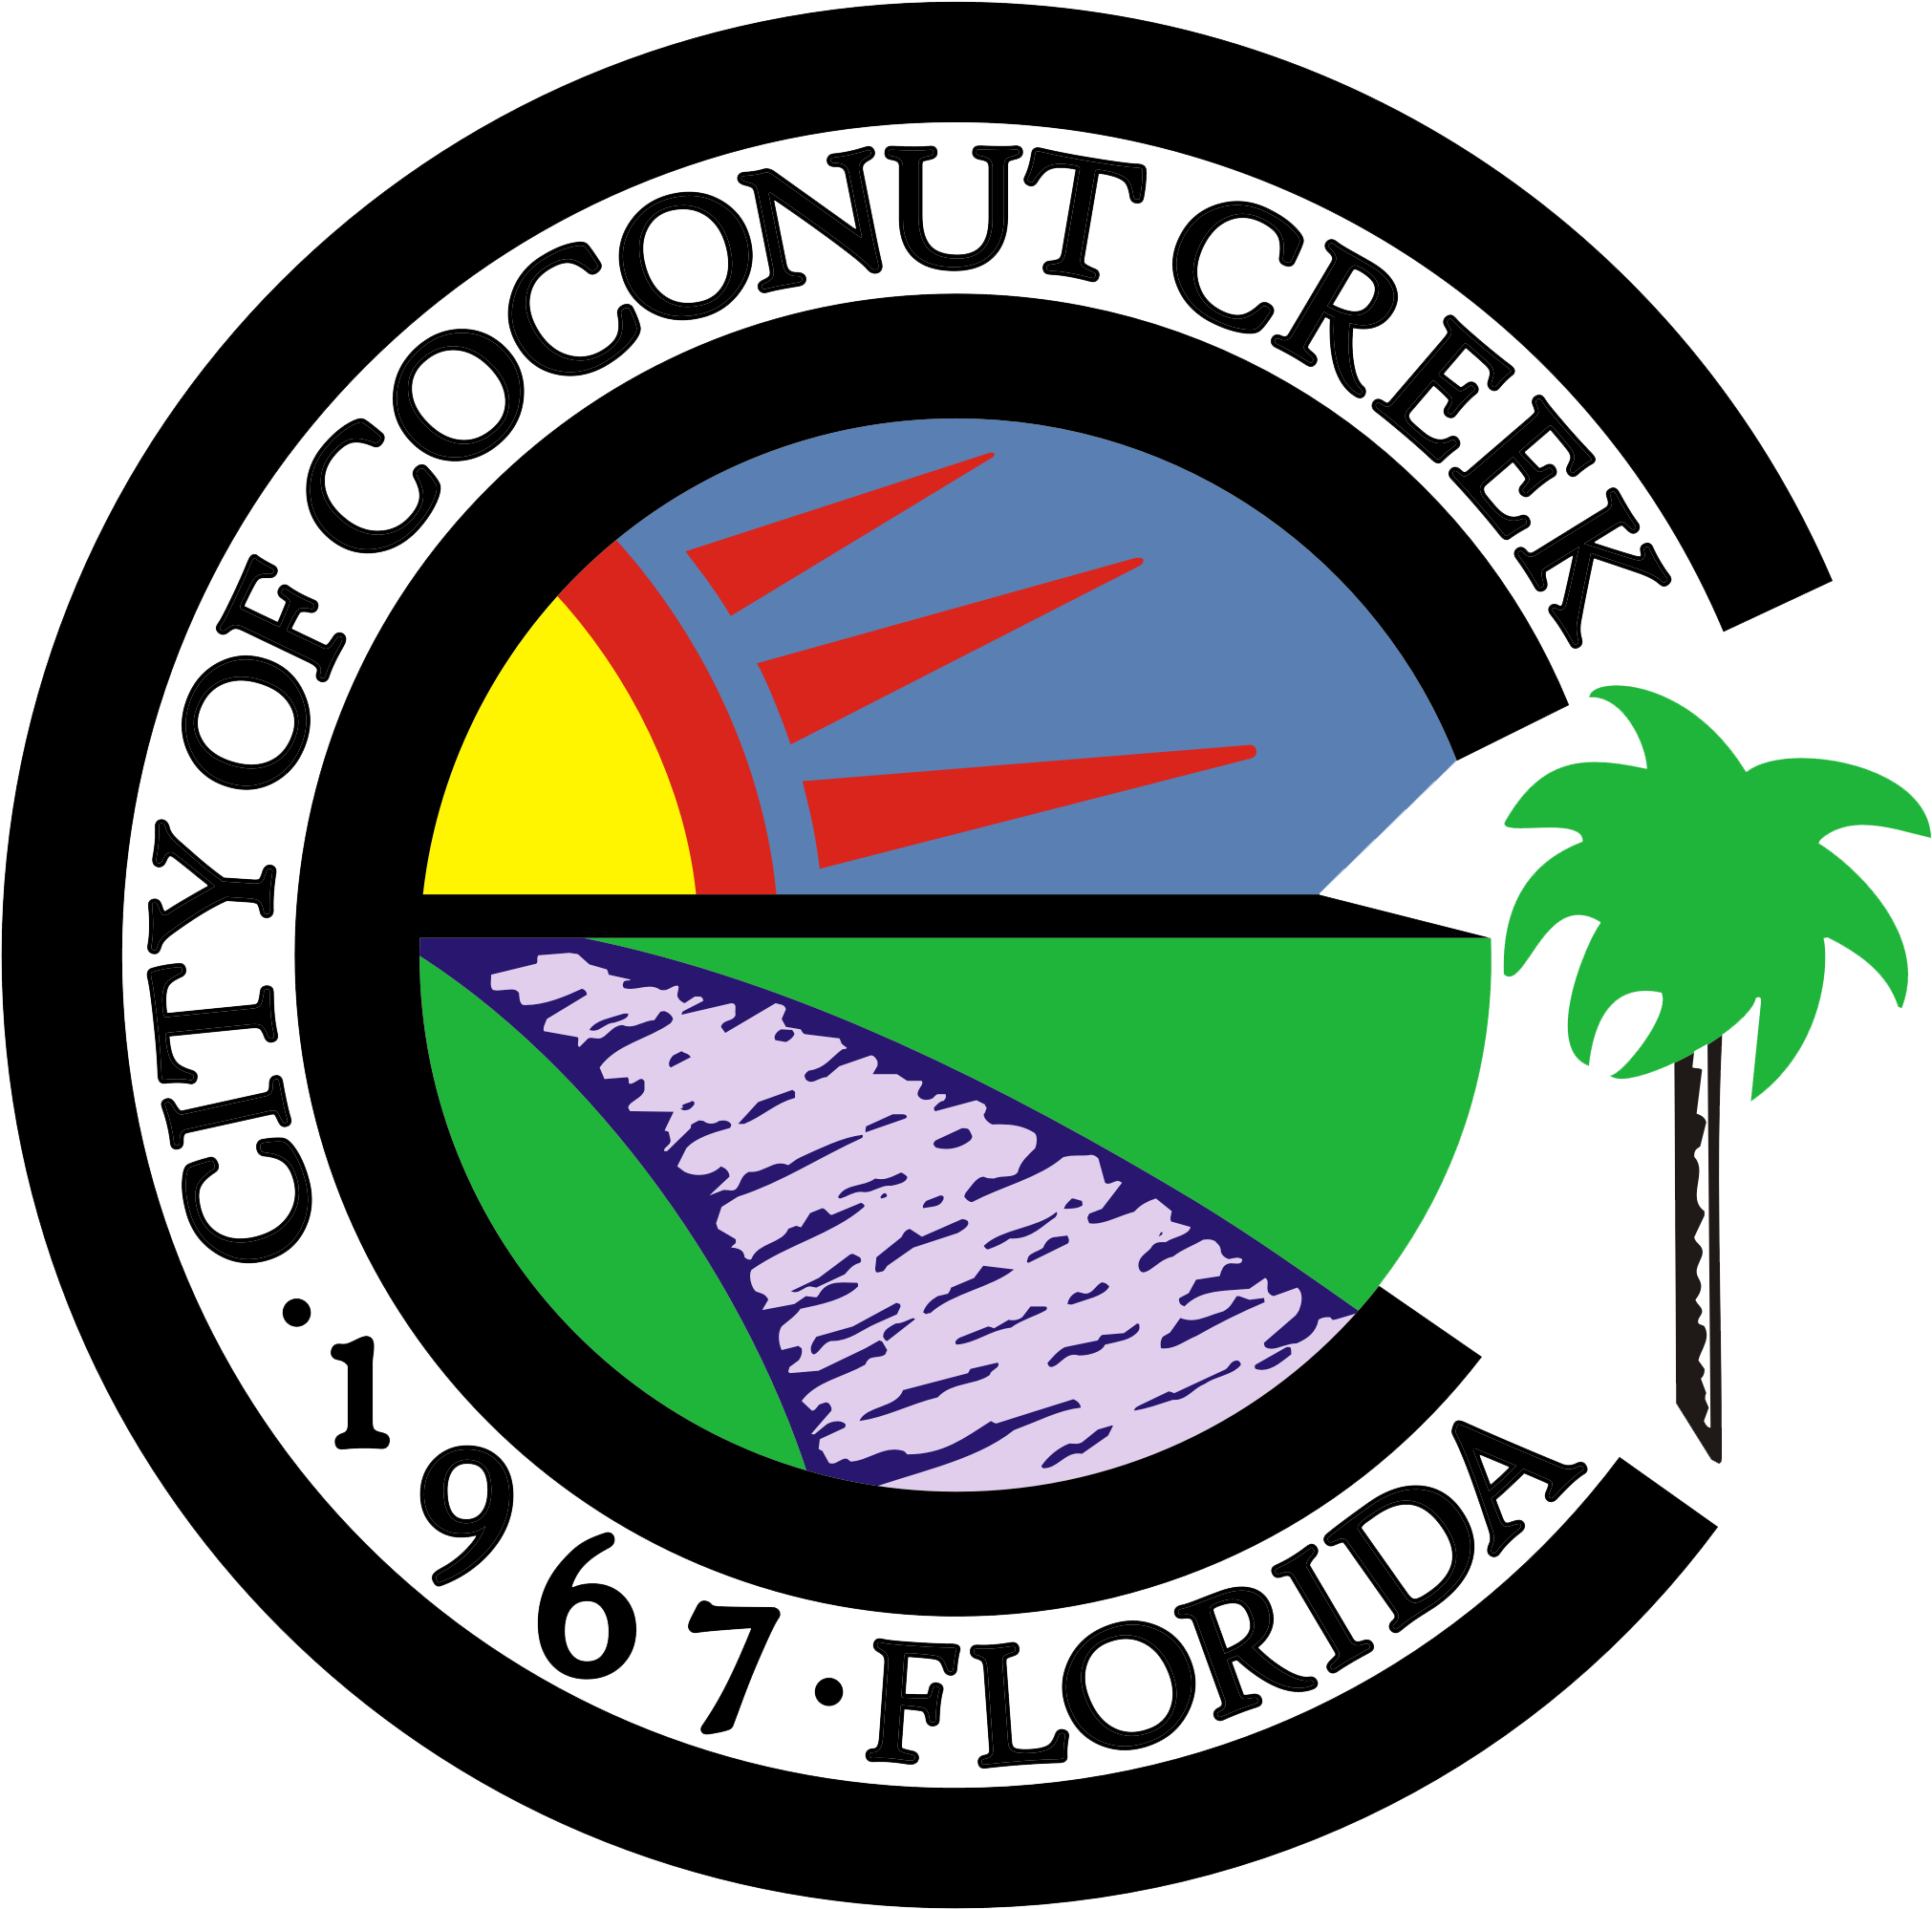 52 Pm 635489 Coconut Creek Logo With White Back Ground - City Of Coconut Creek Logo (2099x2098)